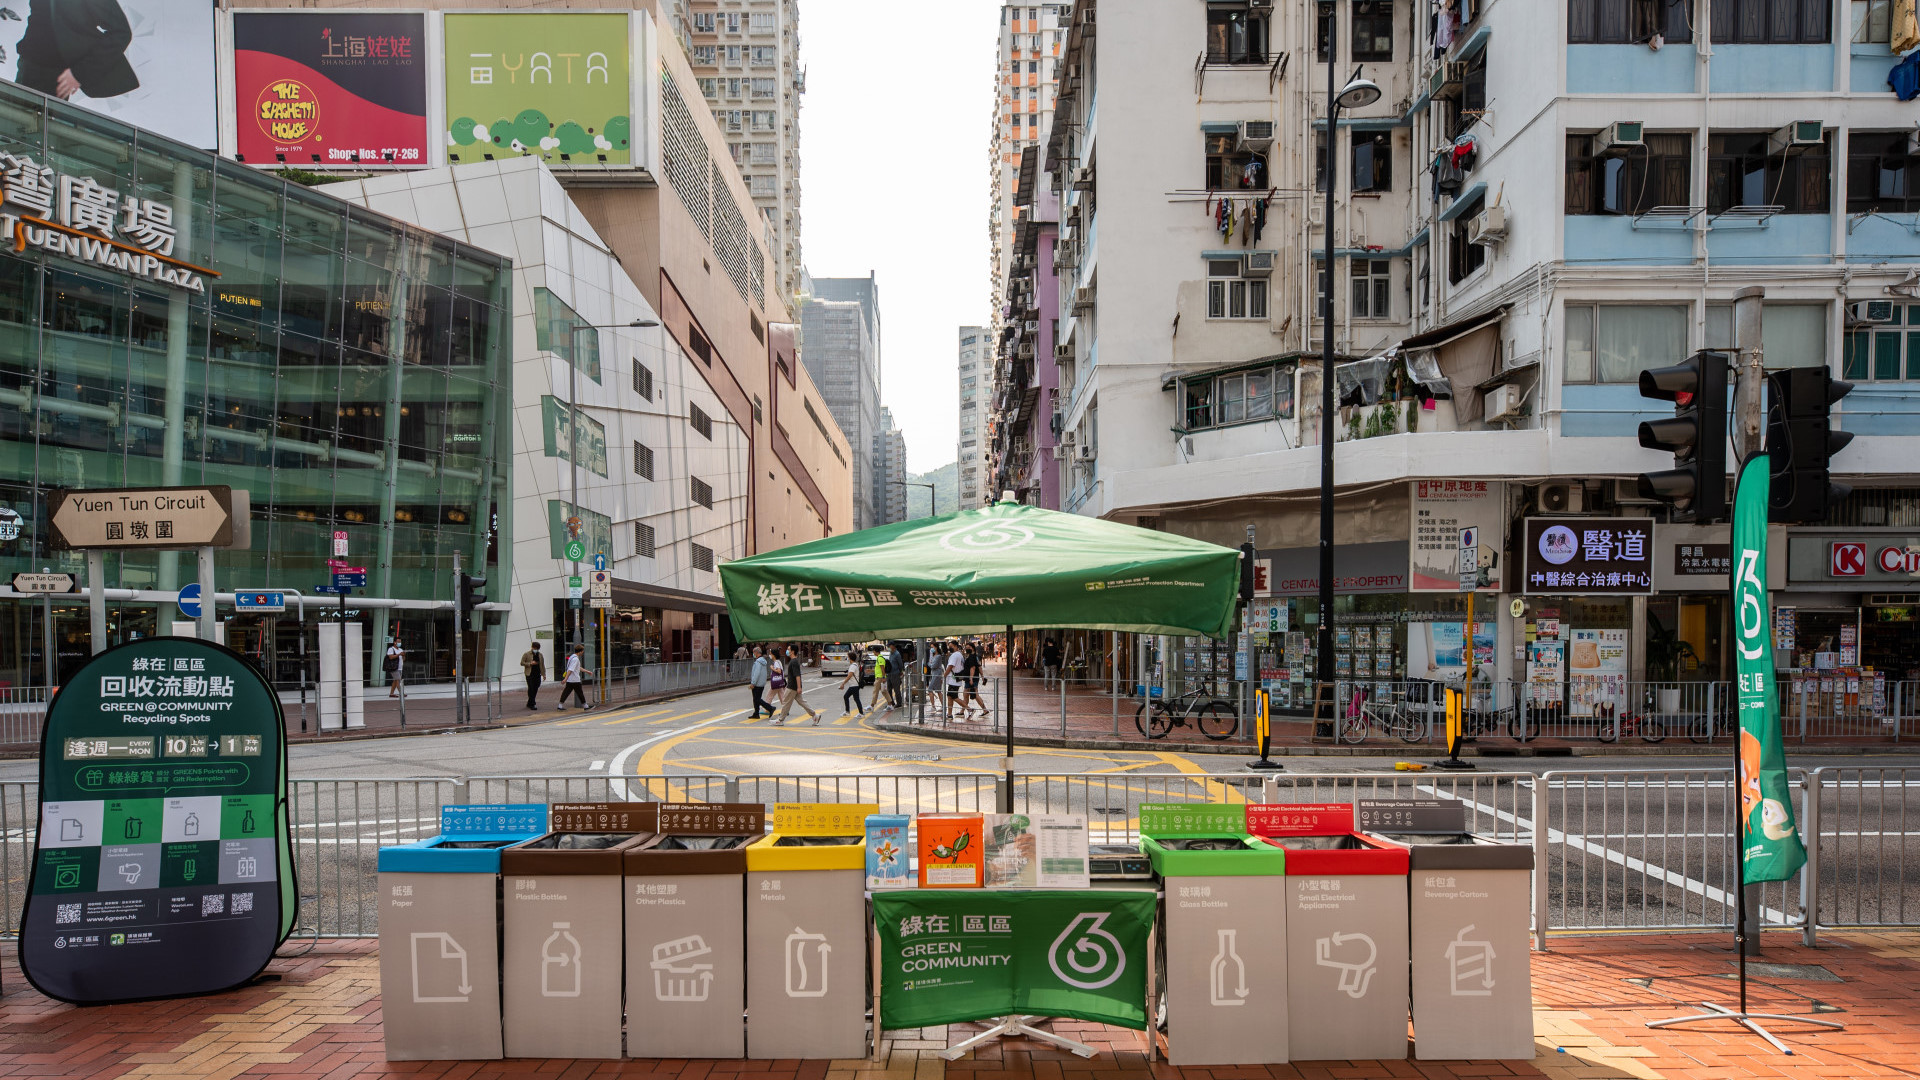 The setup of Recycling Spot includes collection bins, marquee, roll-up banner and promotional flags